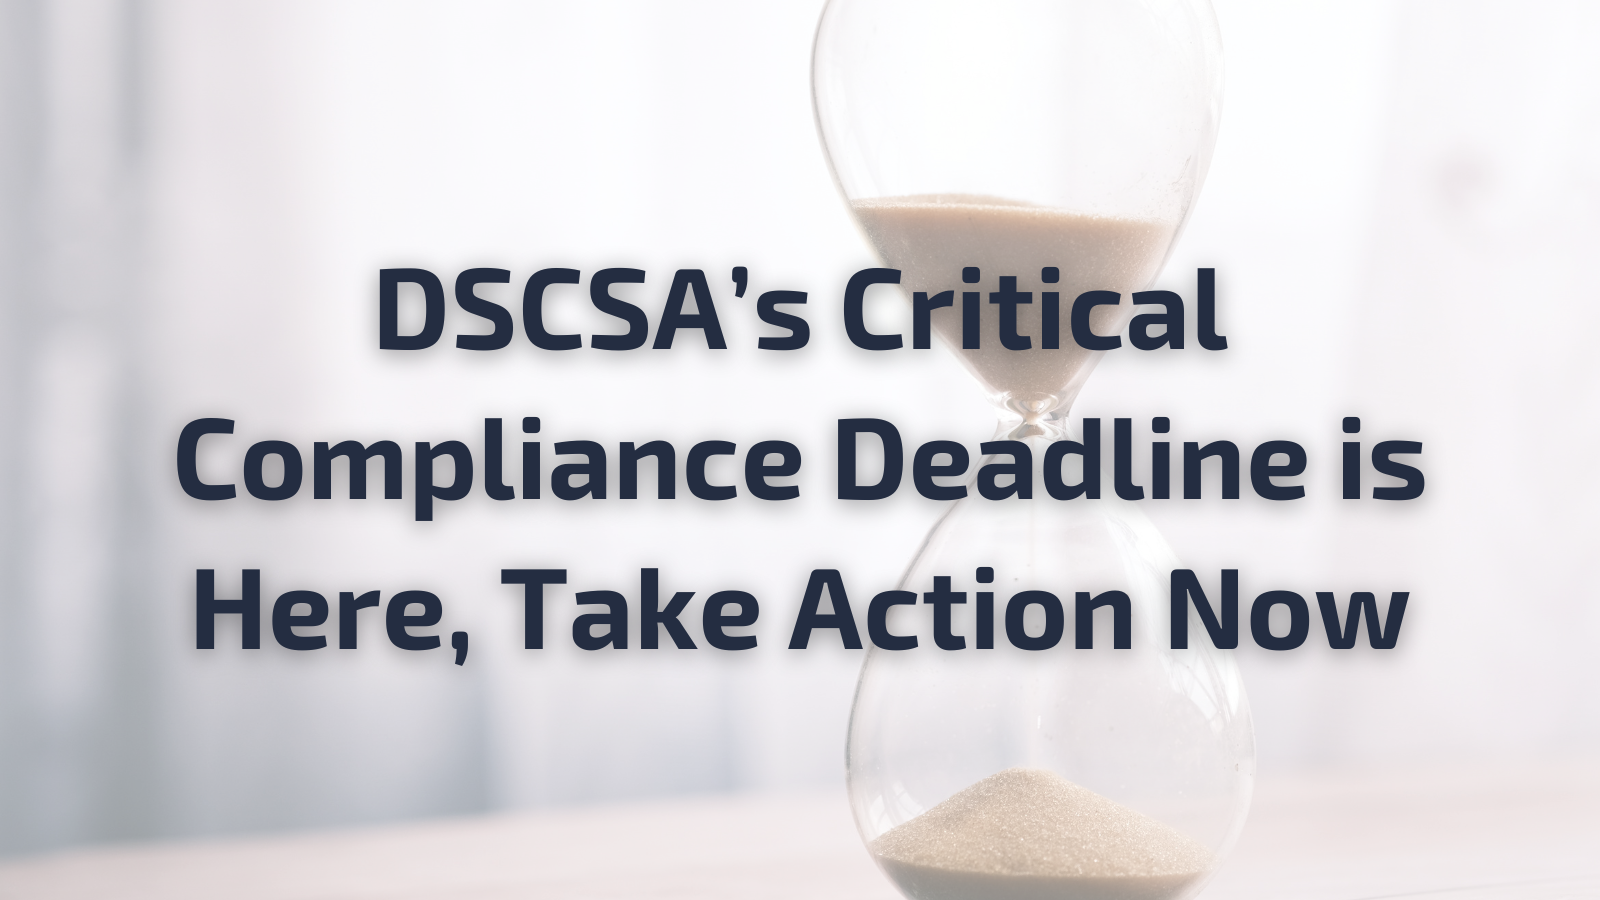 DSCSA’s Critical Compliance Deadline is Here, Take Action Now